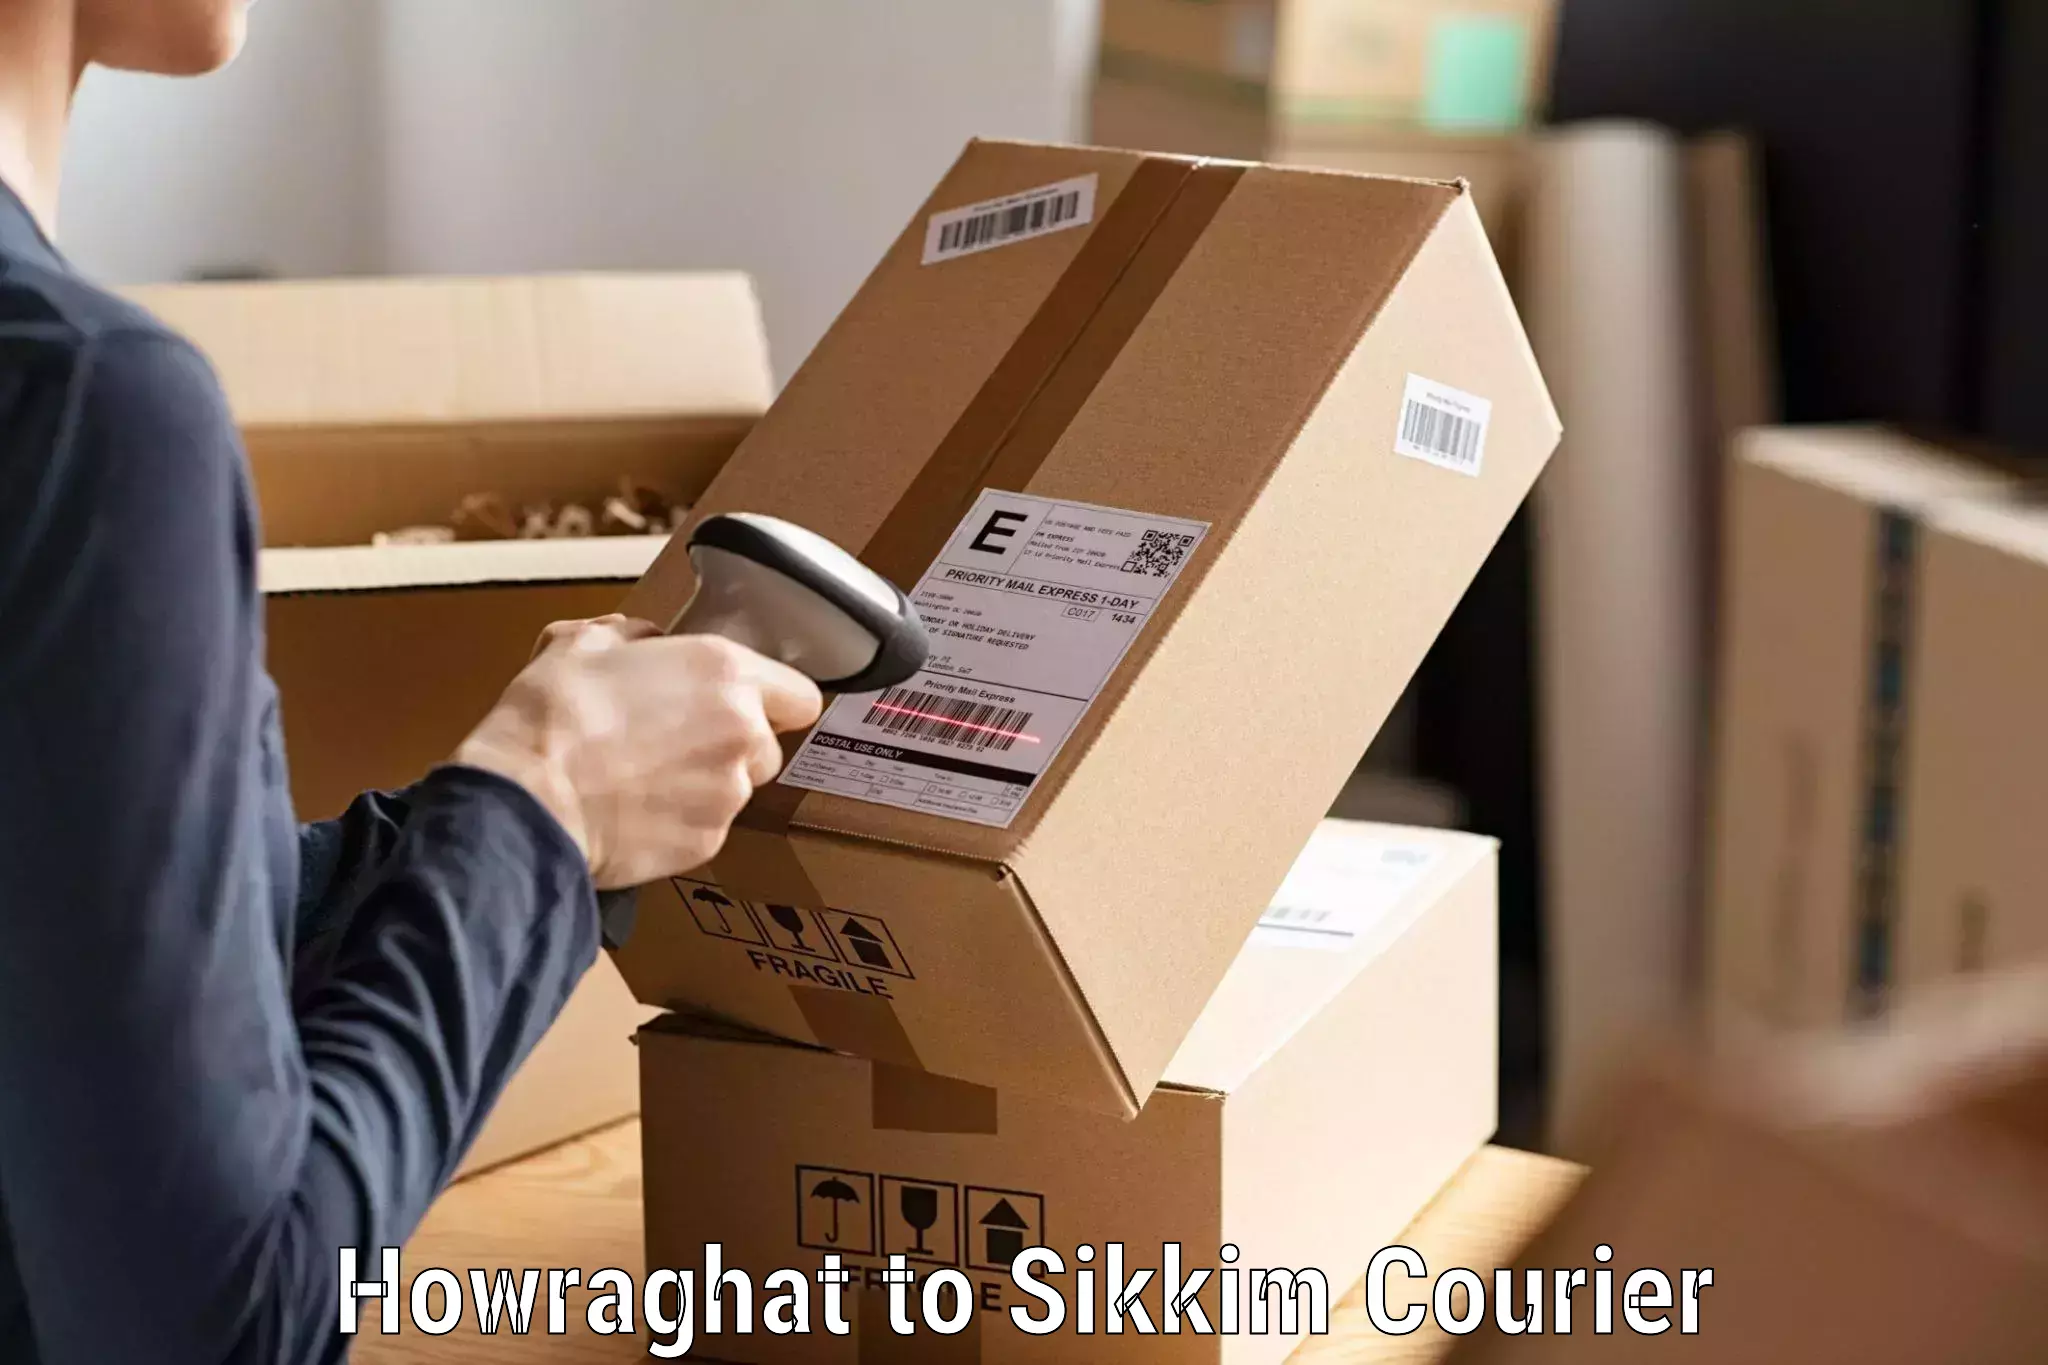 Multi-service courier options Howraghat to Pelling